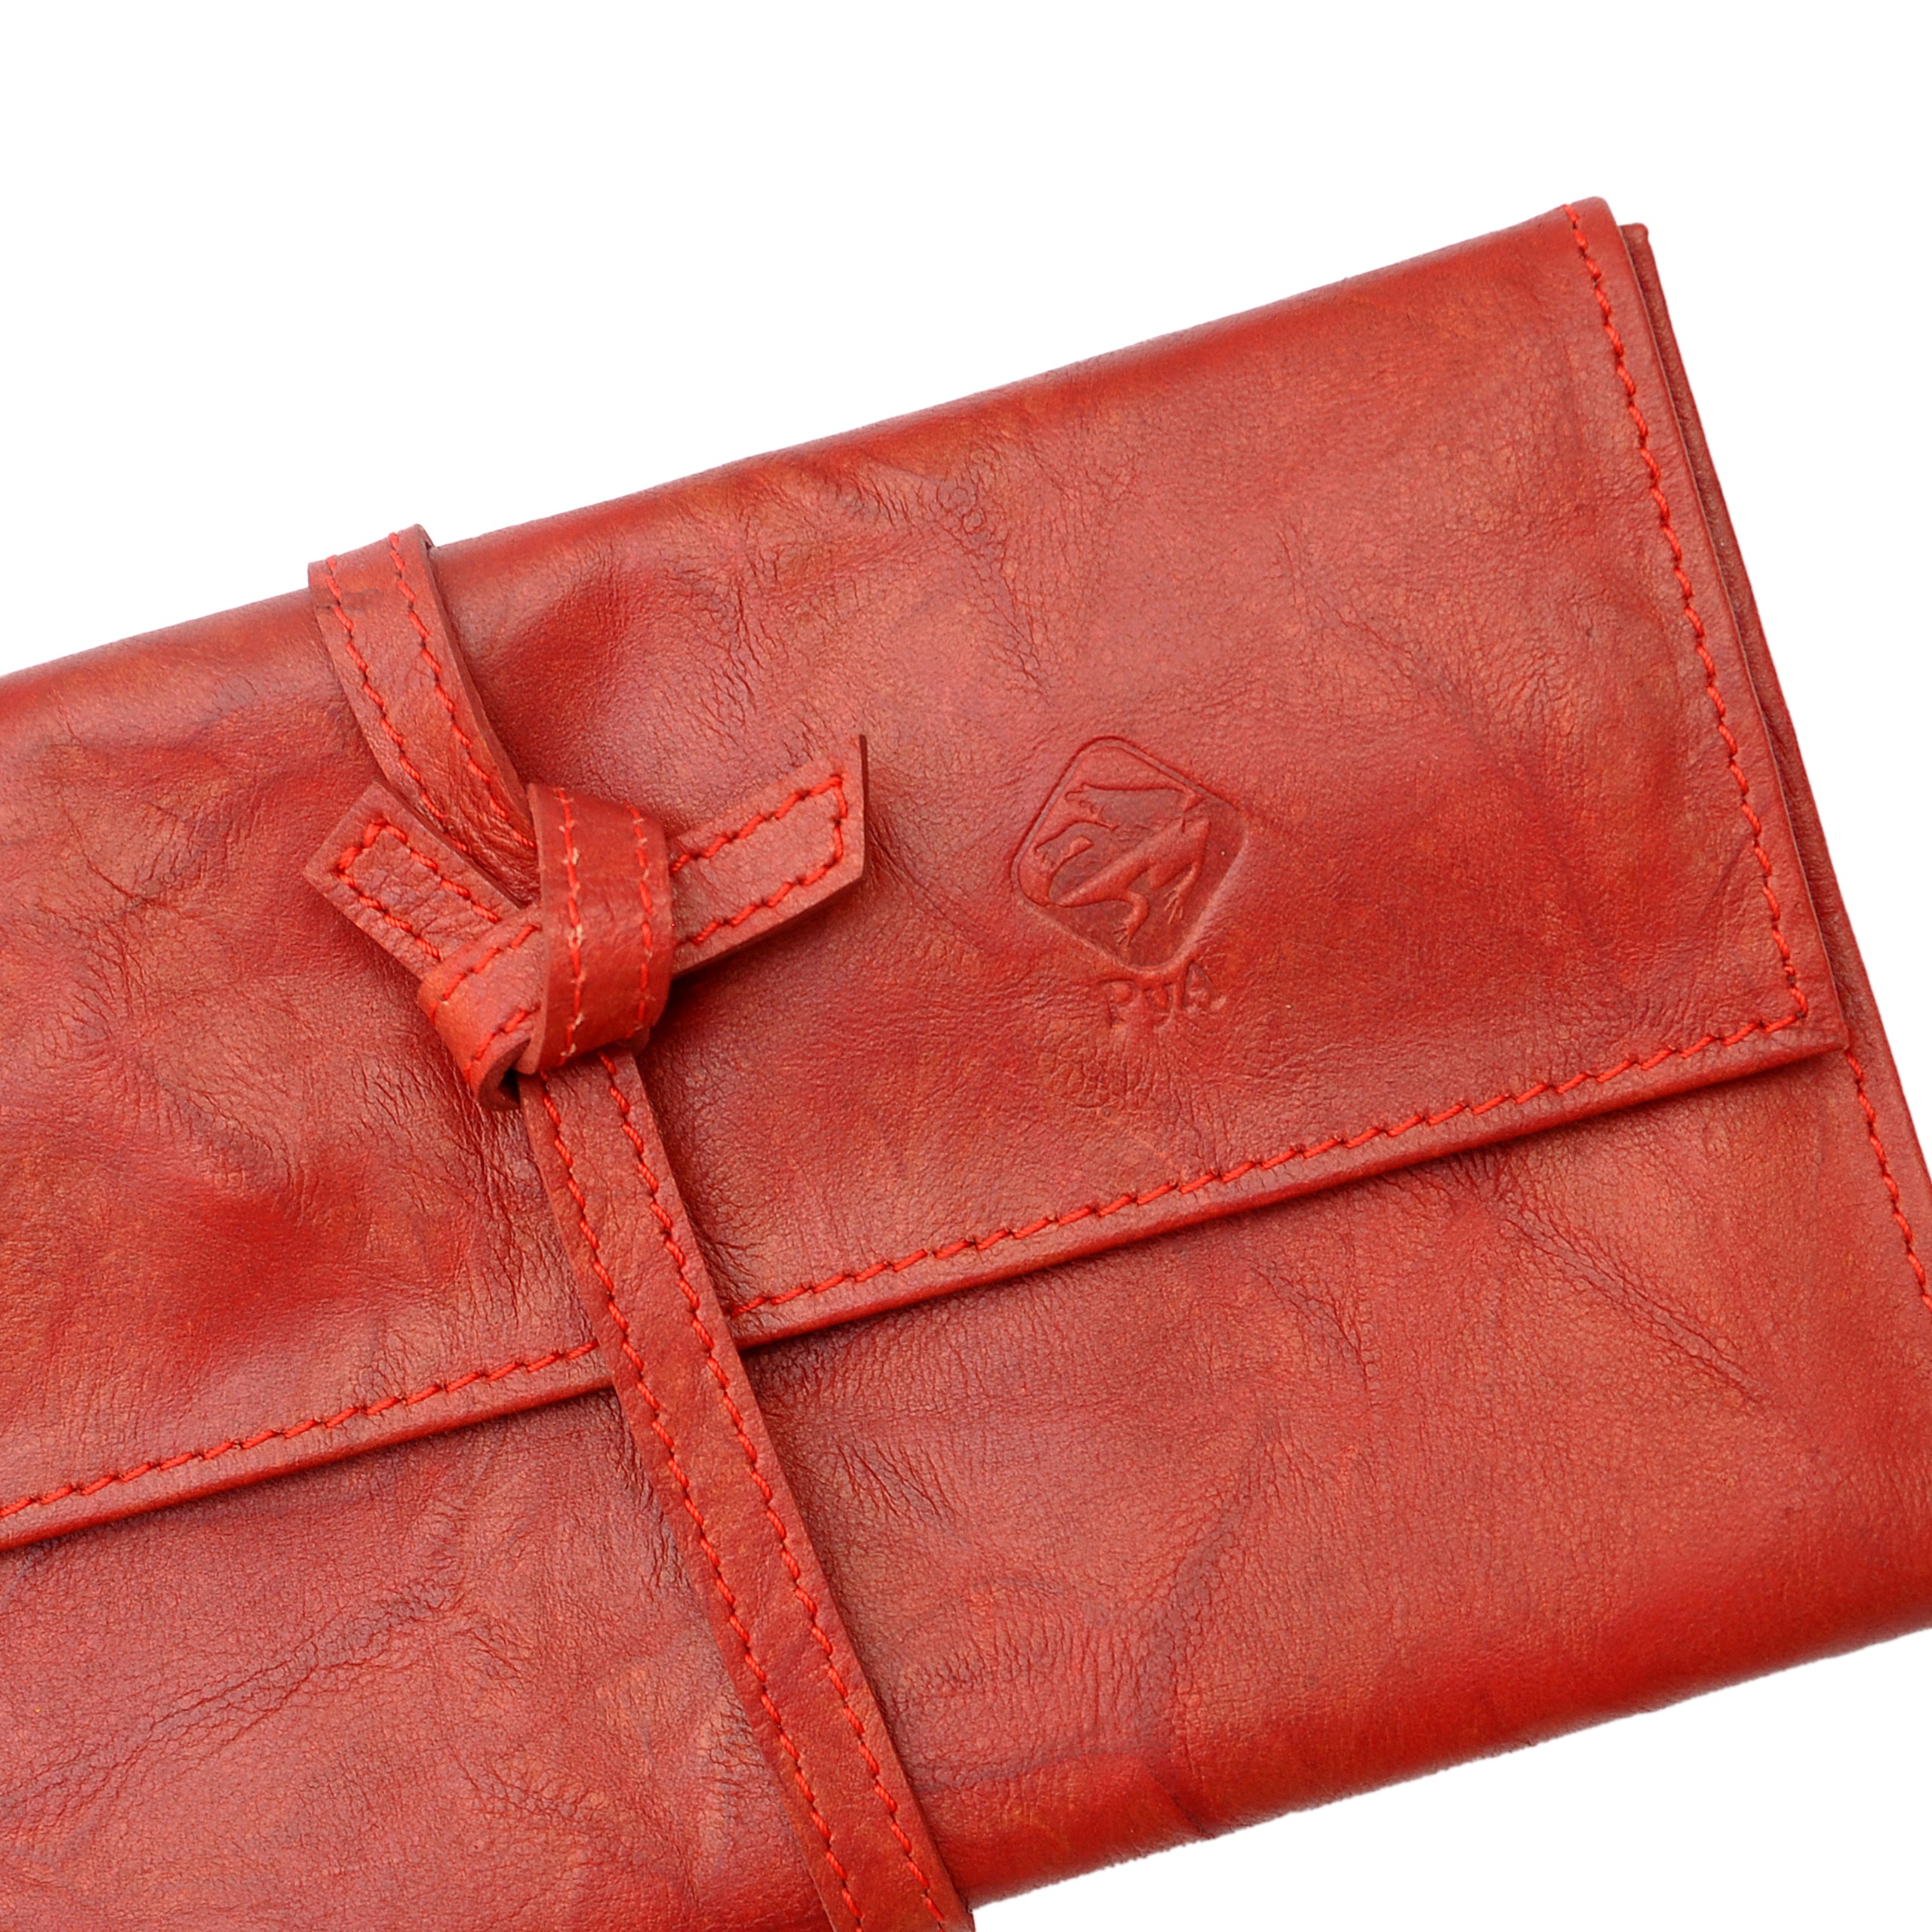 Red Jewelry Travel Wallet